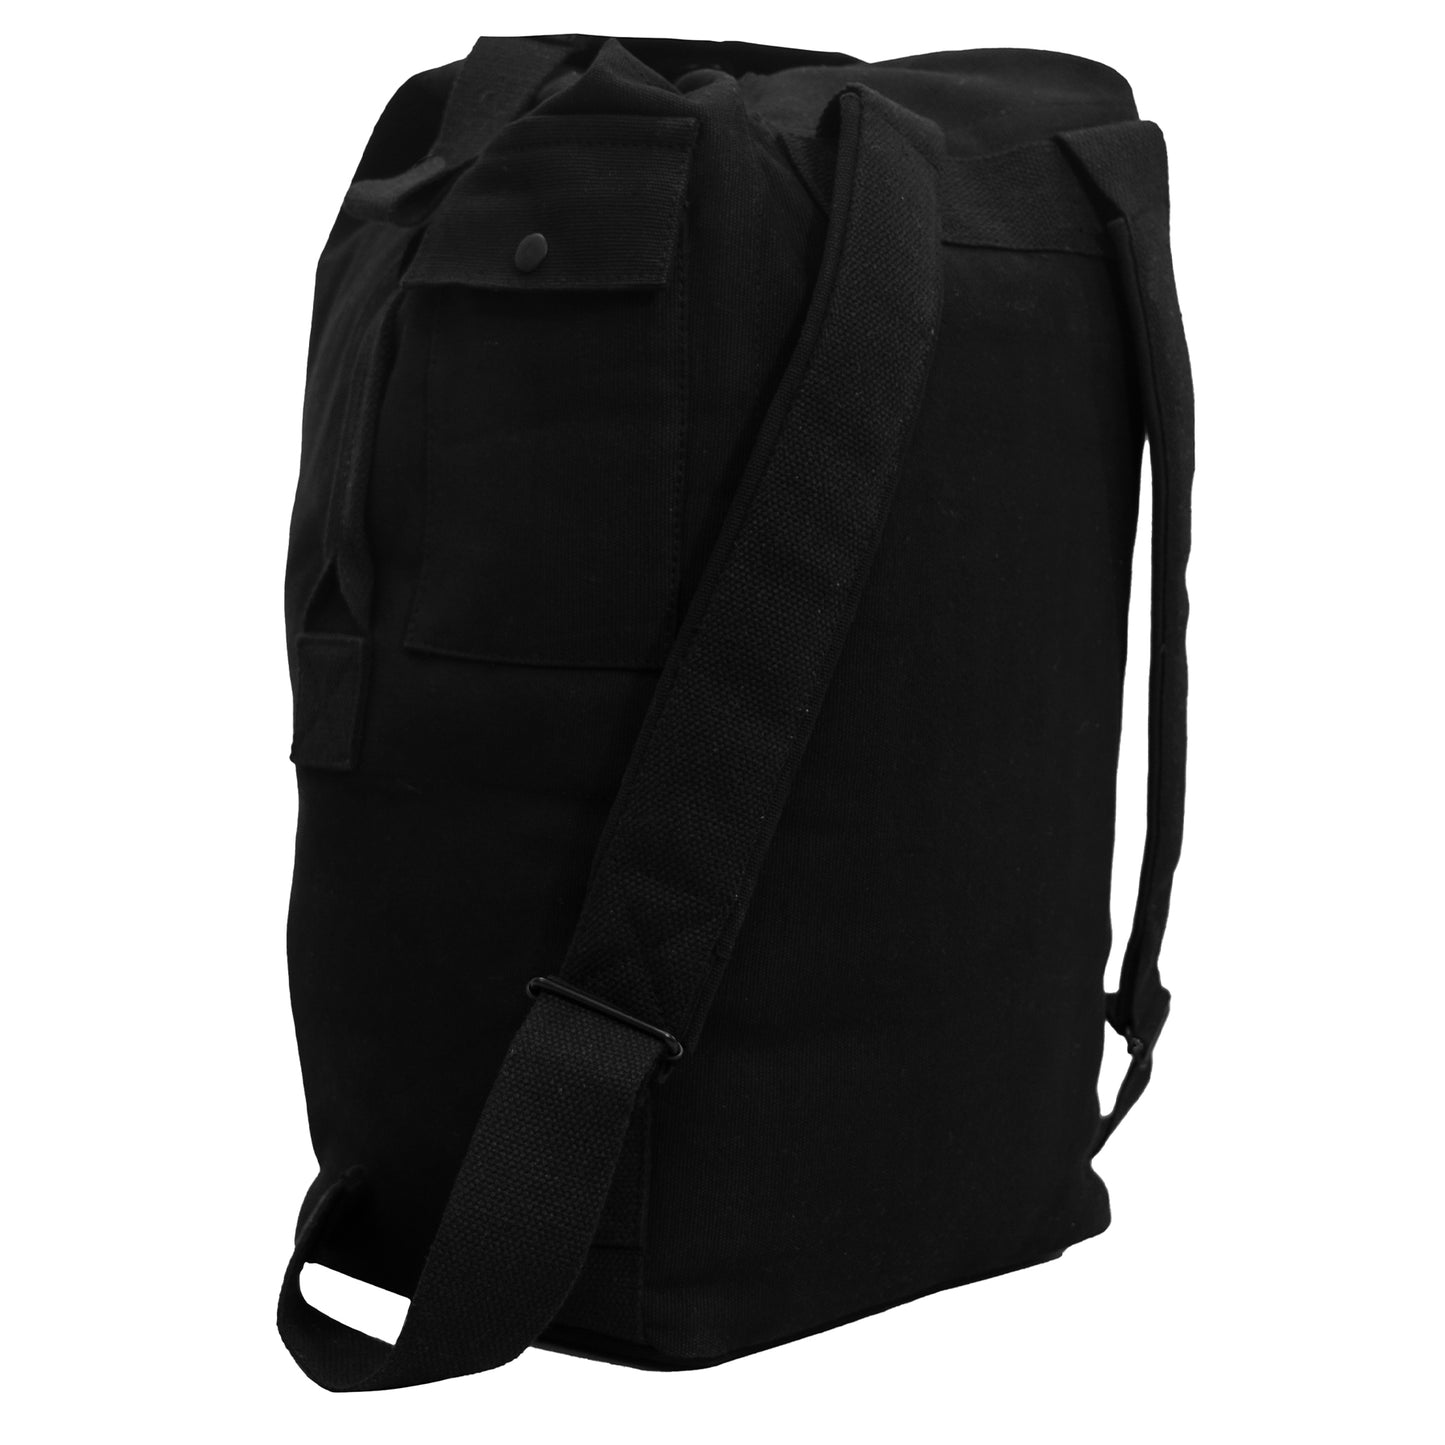 Nomad Canvas Duffle Backpack, Black